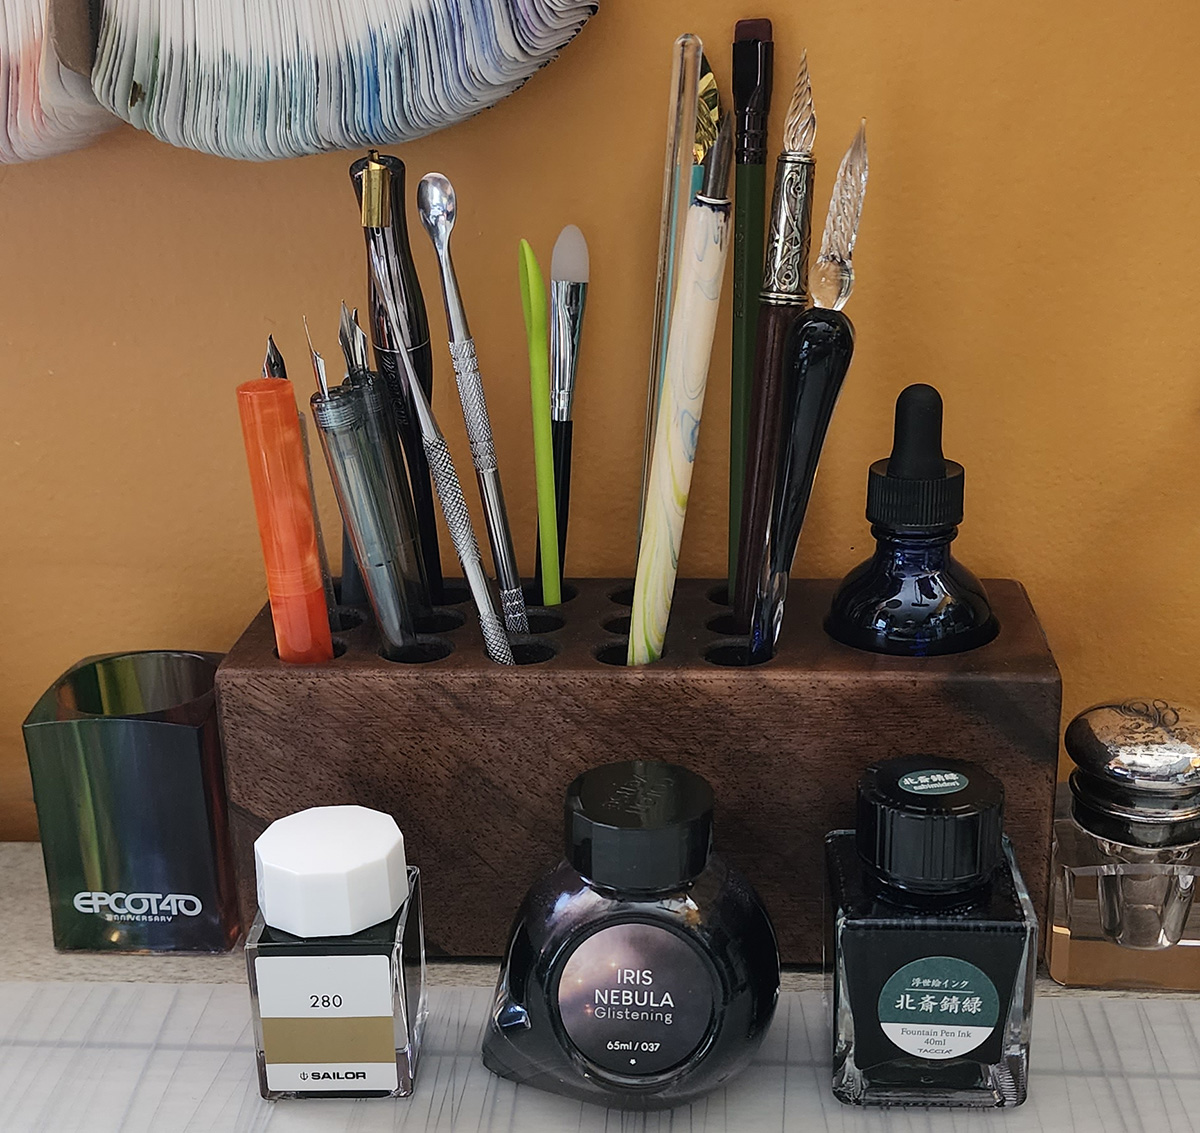 A wooden pen and tool storage block with 15 pen slots filled with a variety of dip pens and swatching tools, and a small bottle of water with a dropper cap in the single large storage slot.